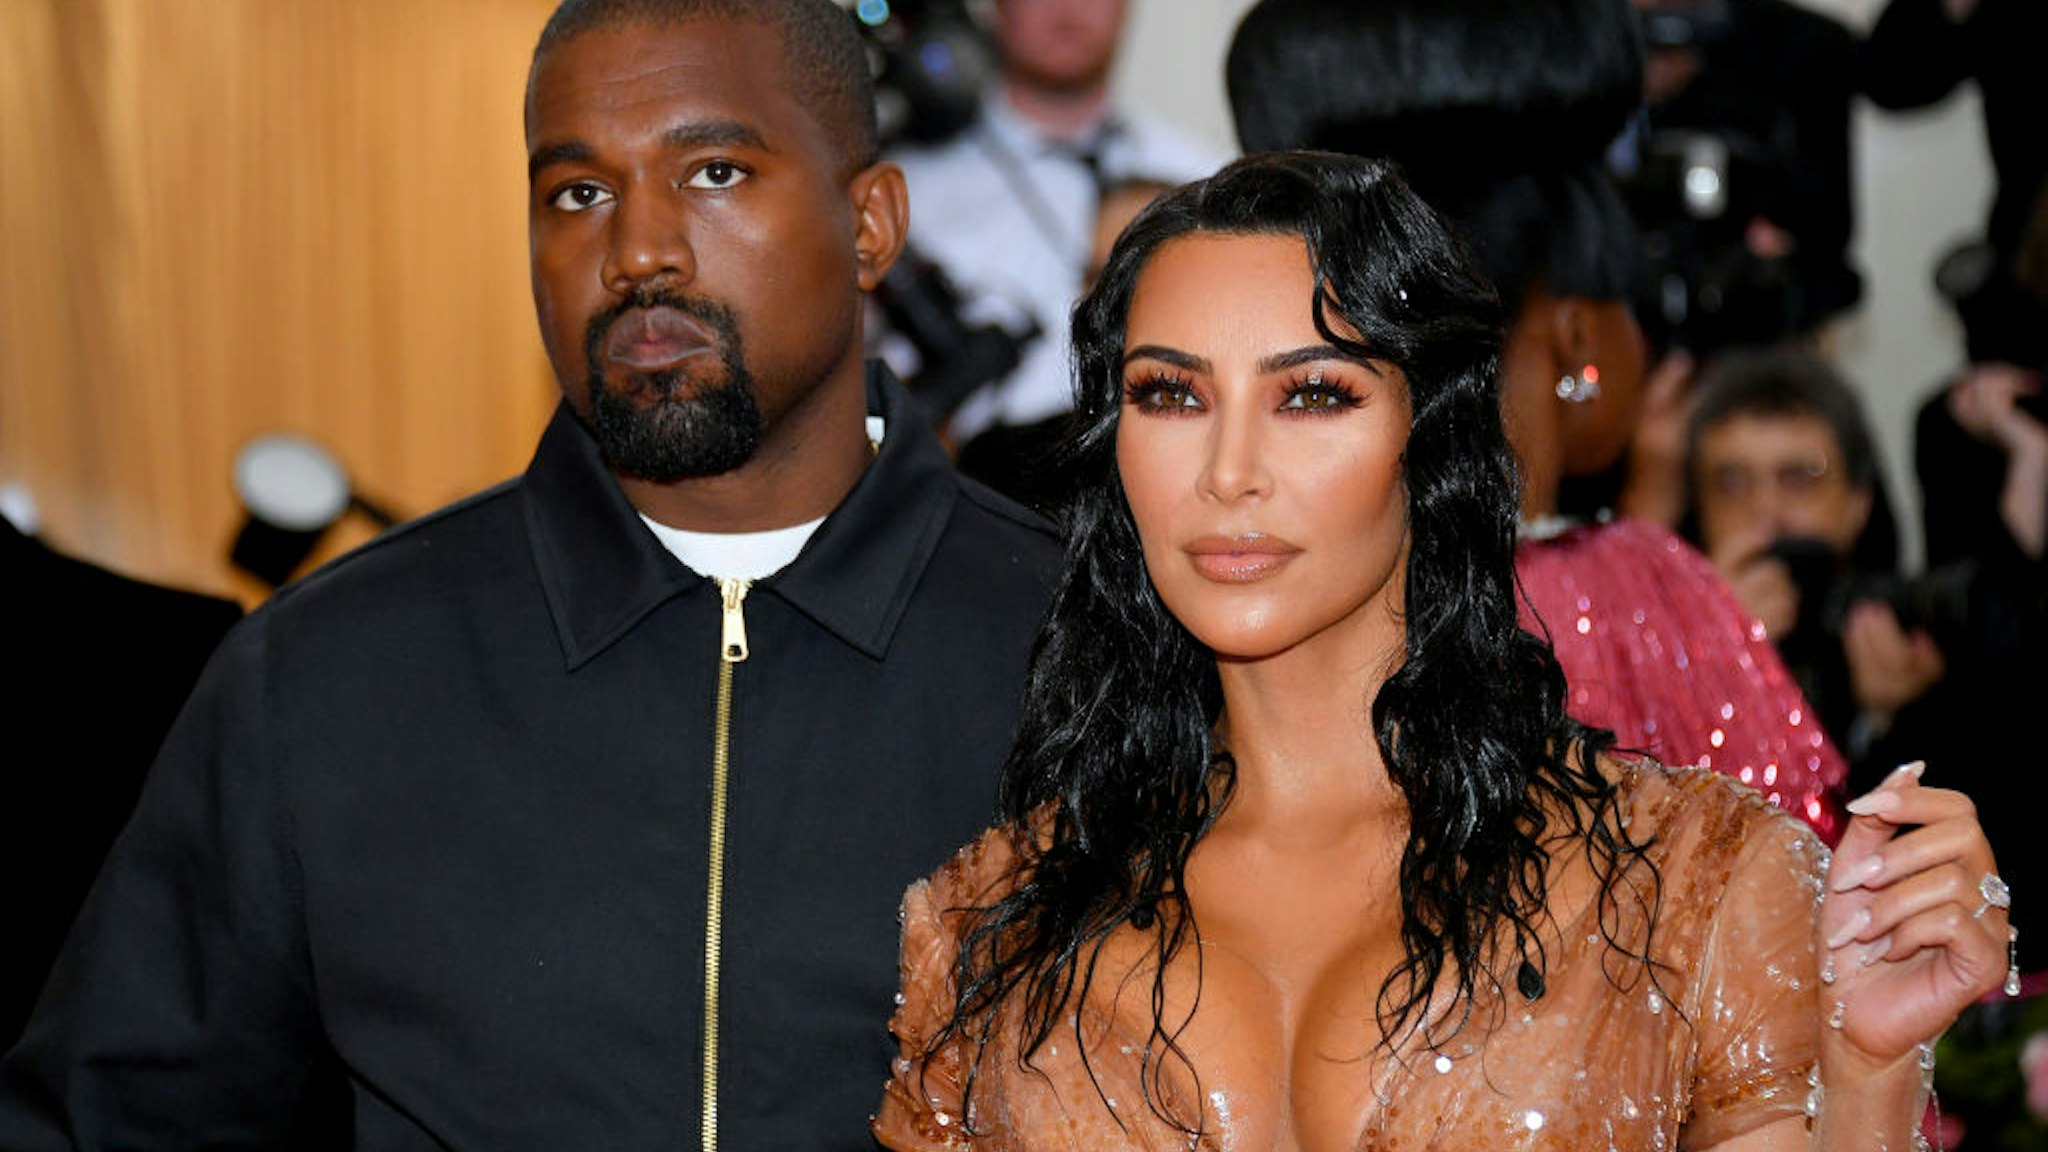 MAY 06: Kim Kardashian West and Kanye West attend The 2019 Met Gala Celebrating Camp: Notes on Fashion at Metropolitan Museum of Art on May 06, 2019 in New York City.